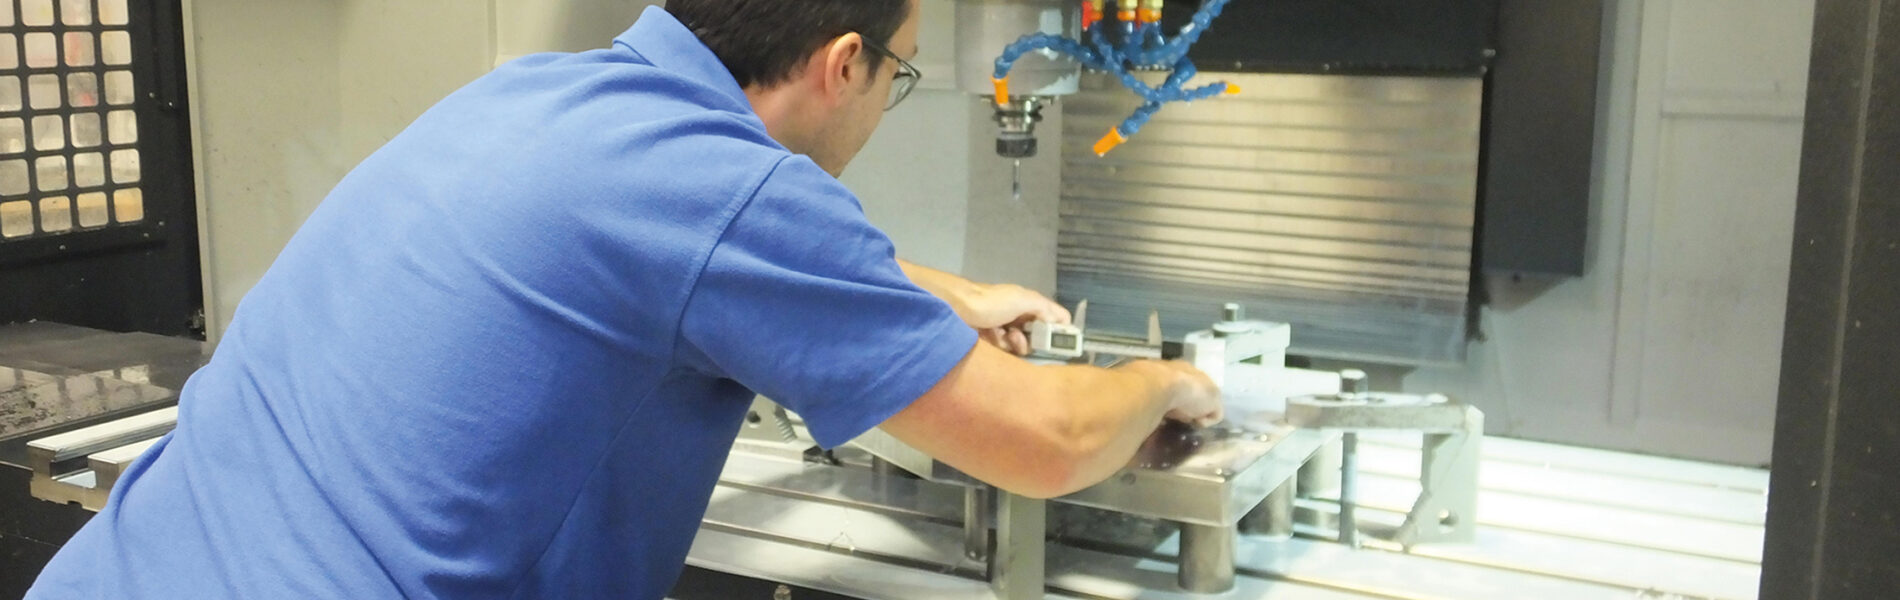 Hyfore employee setting up fixtures in a CNC milling machine